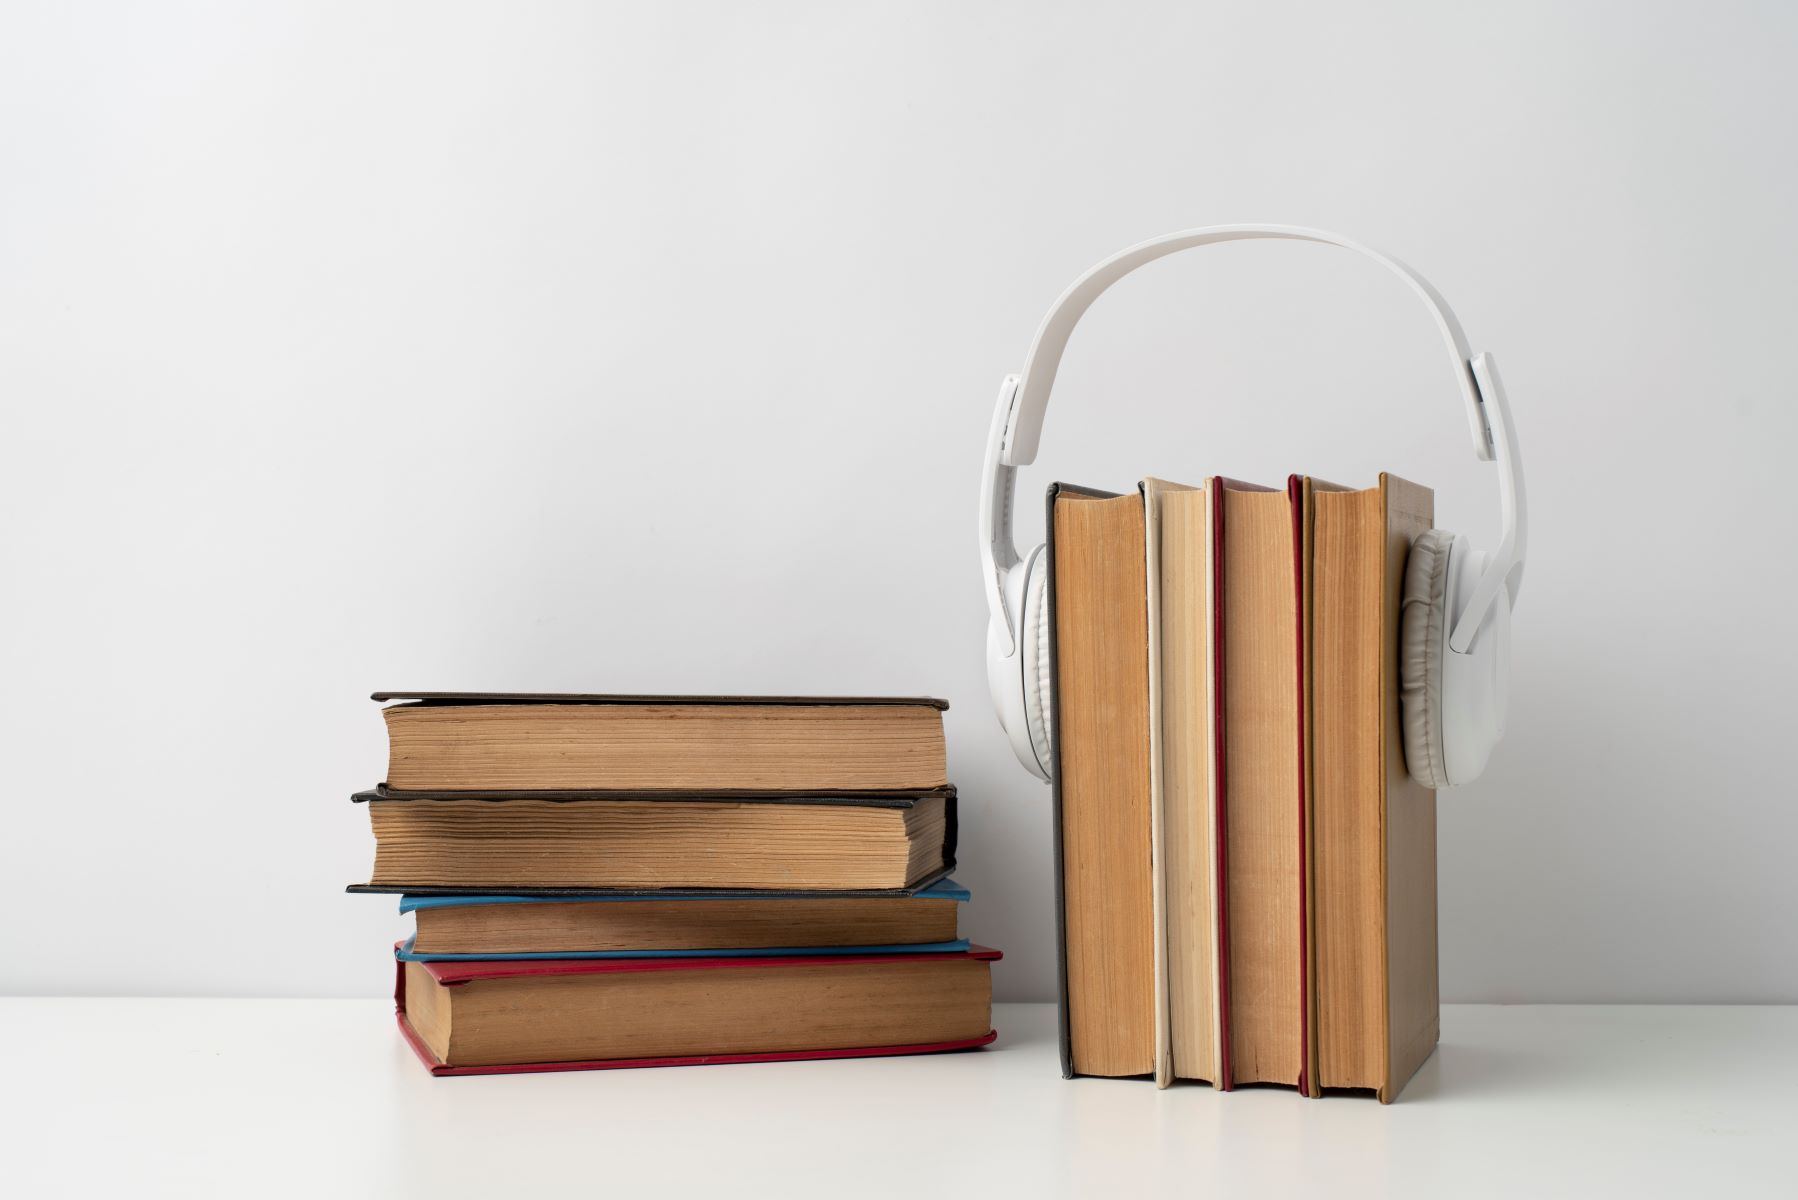 How To Make A Book Into An Audiobook